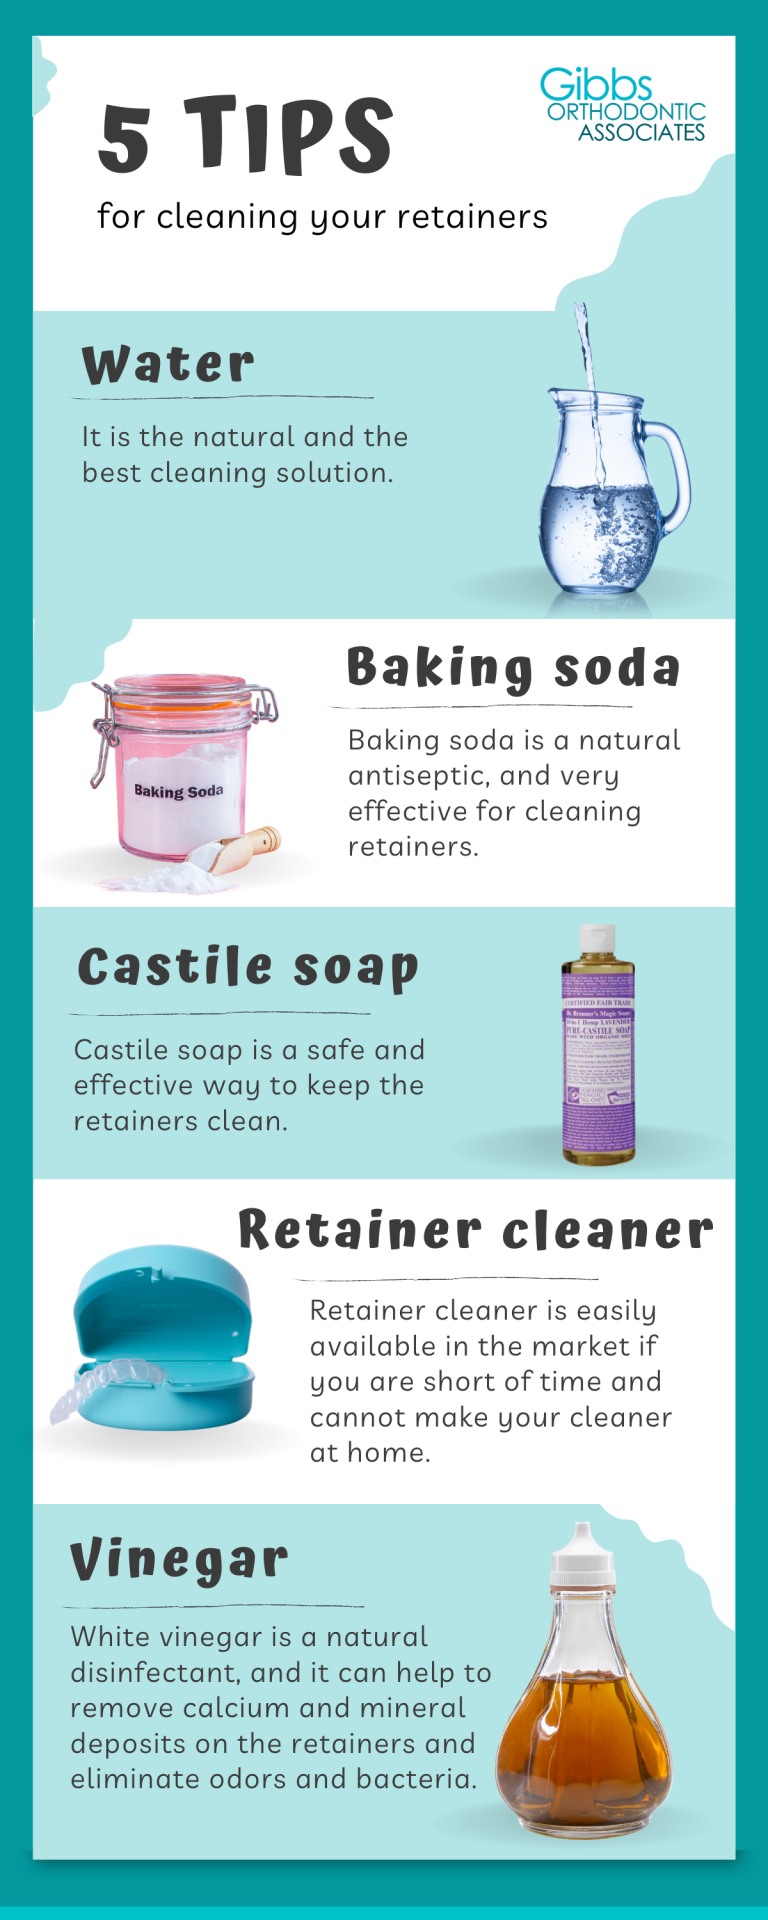 5 Tips for cleaning your retainers 768x1920